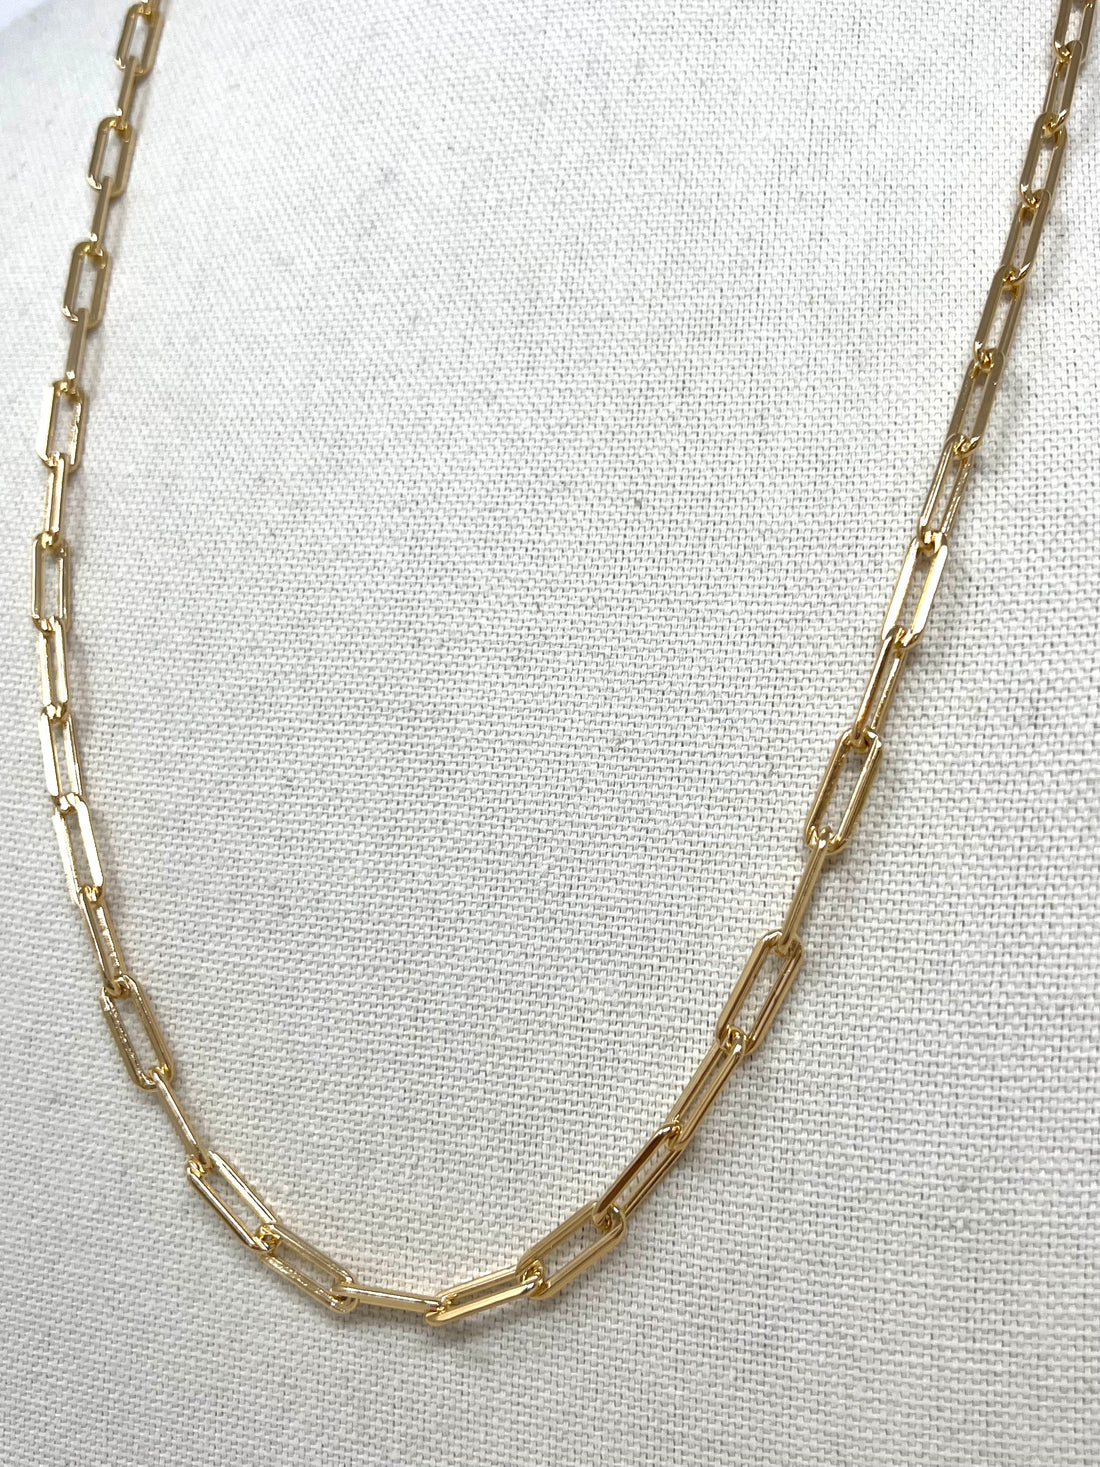 Classic Chainlink Necklace in Gold 30"